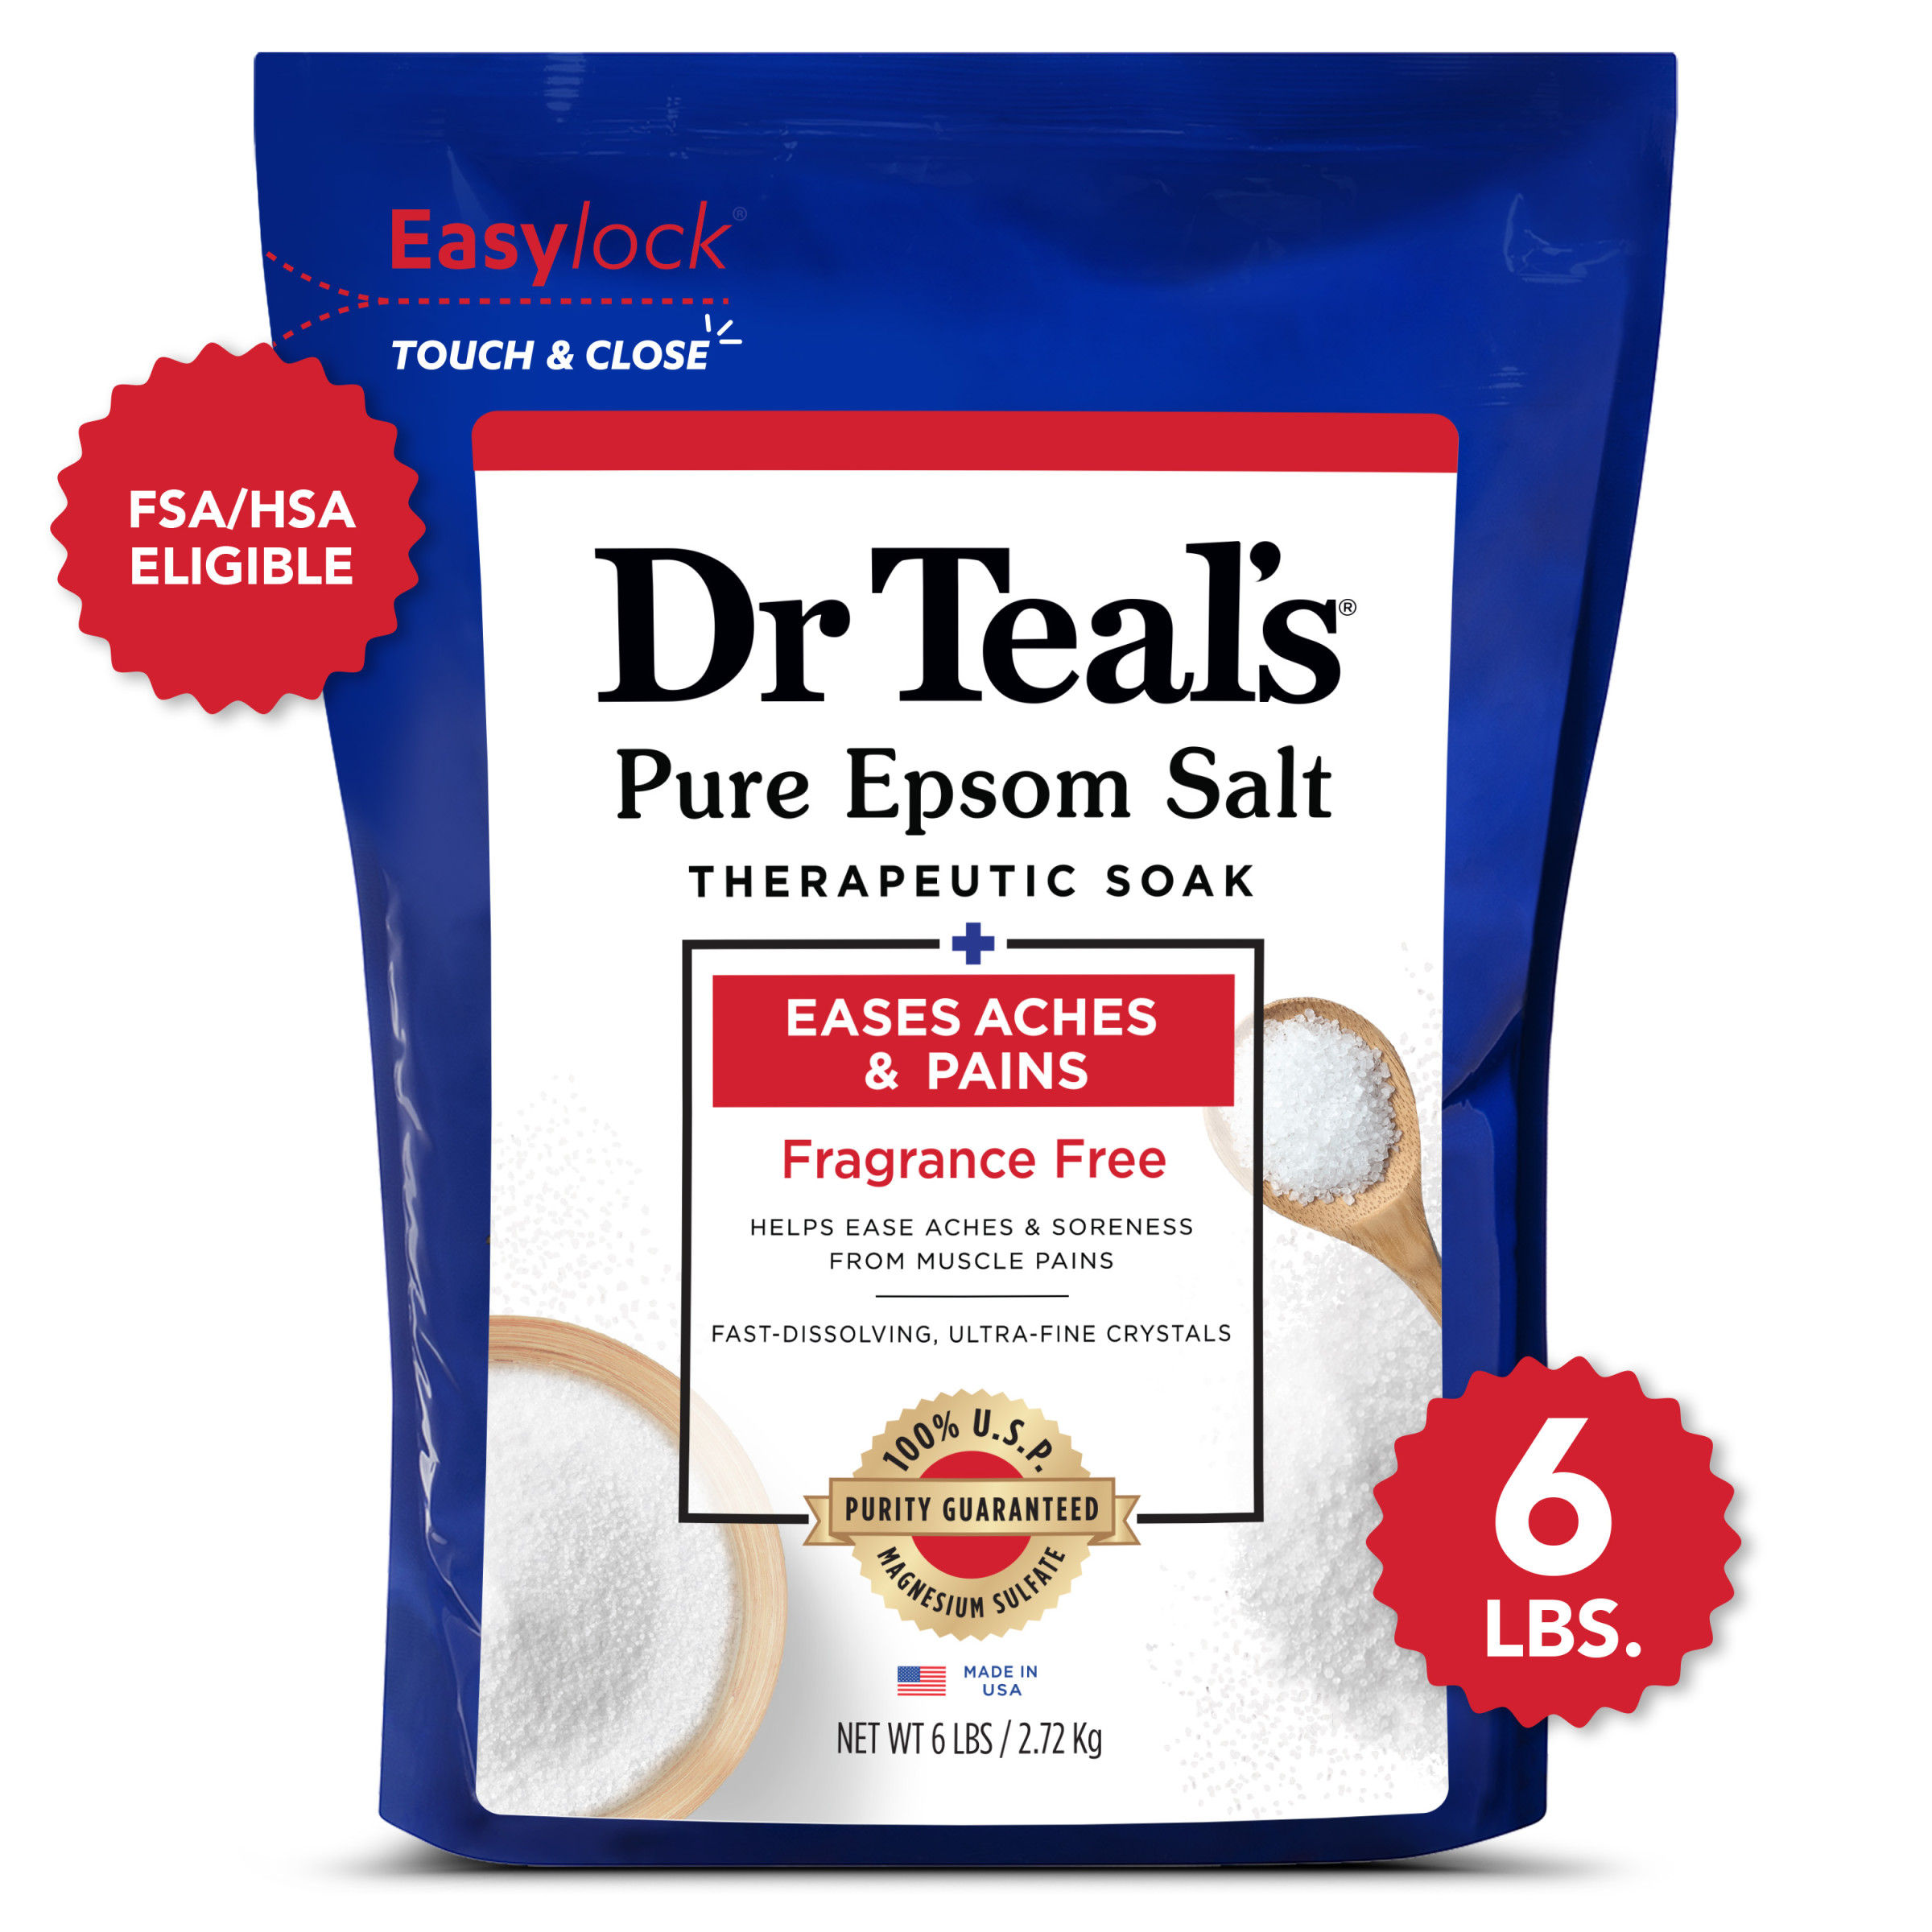 Dr Teal's Pure Epsom Salt Soak, Therapeutic, Fragrance Free, 6 lbs - image 1 of 9